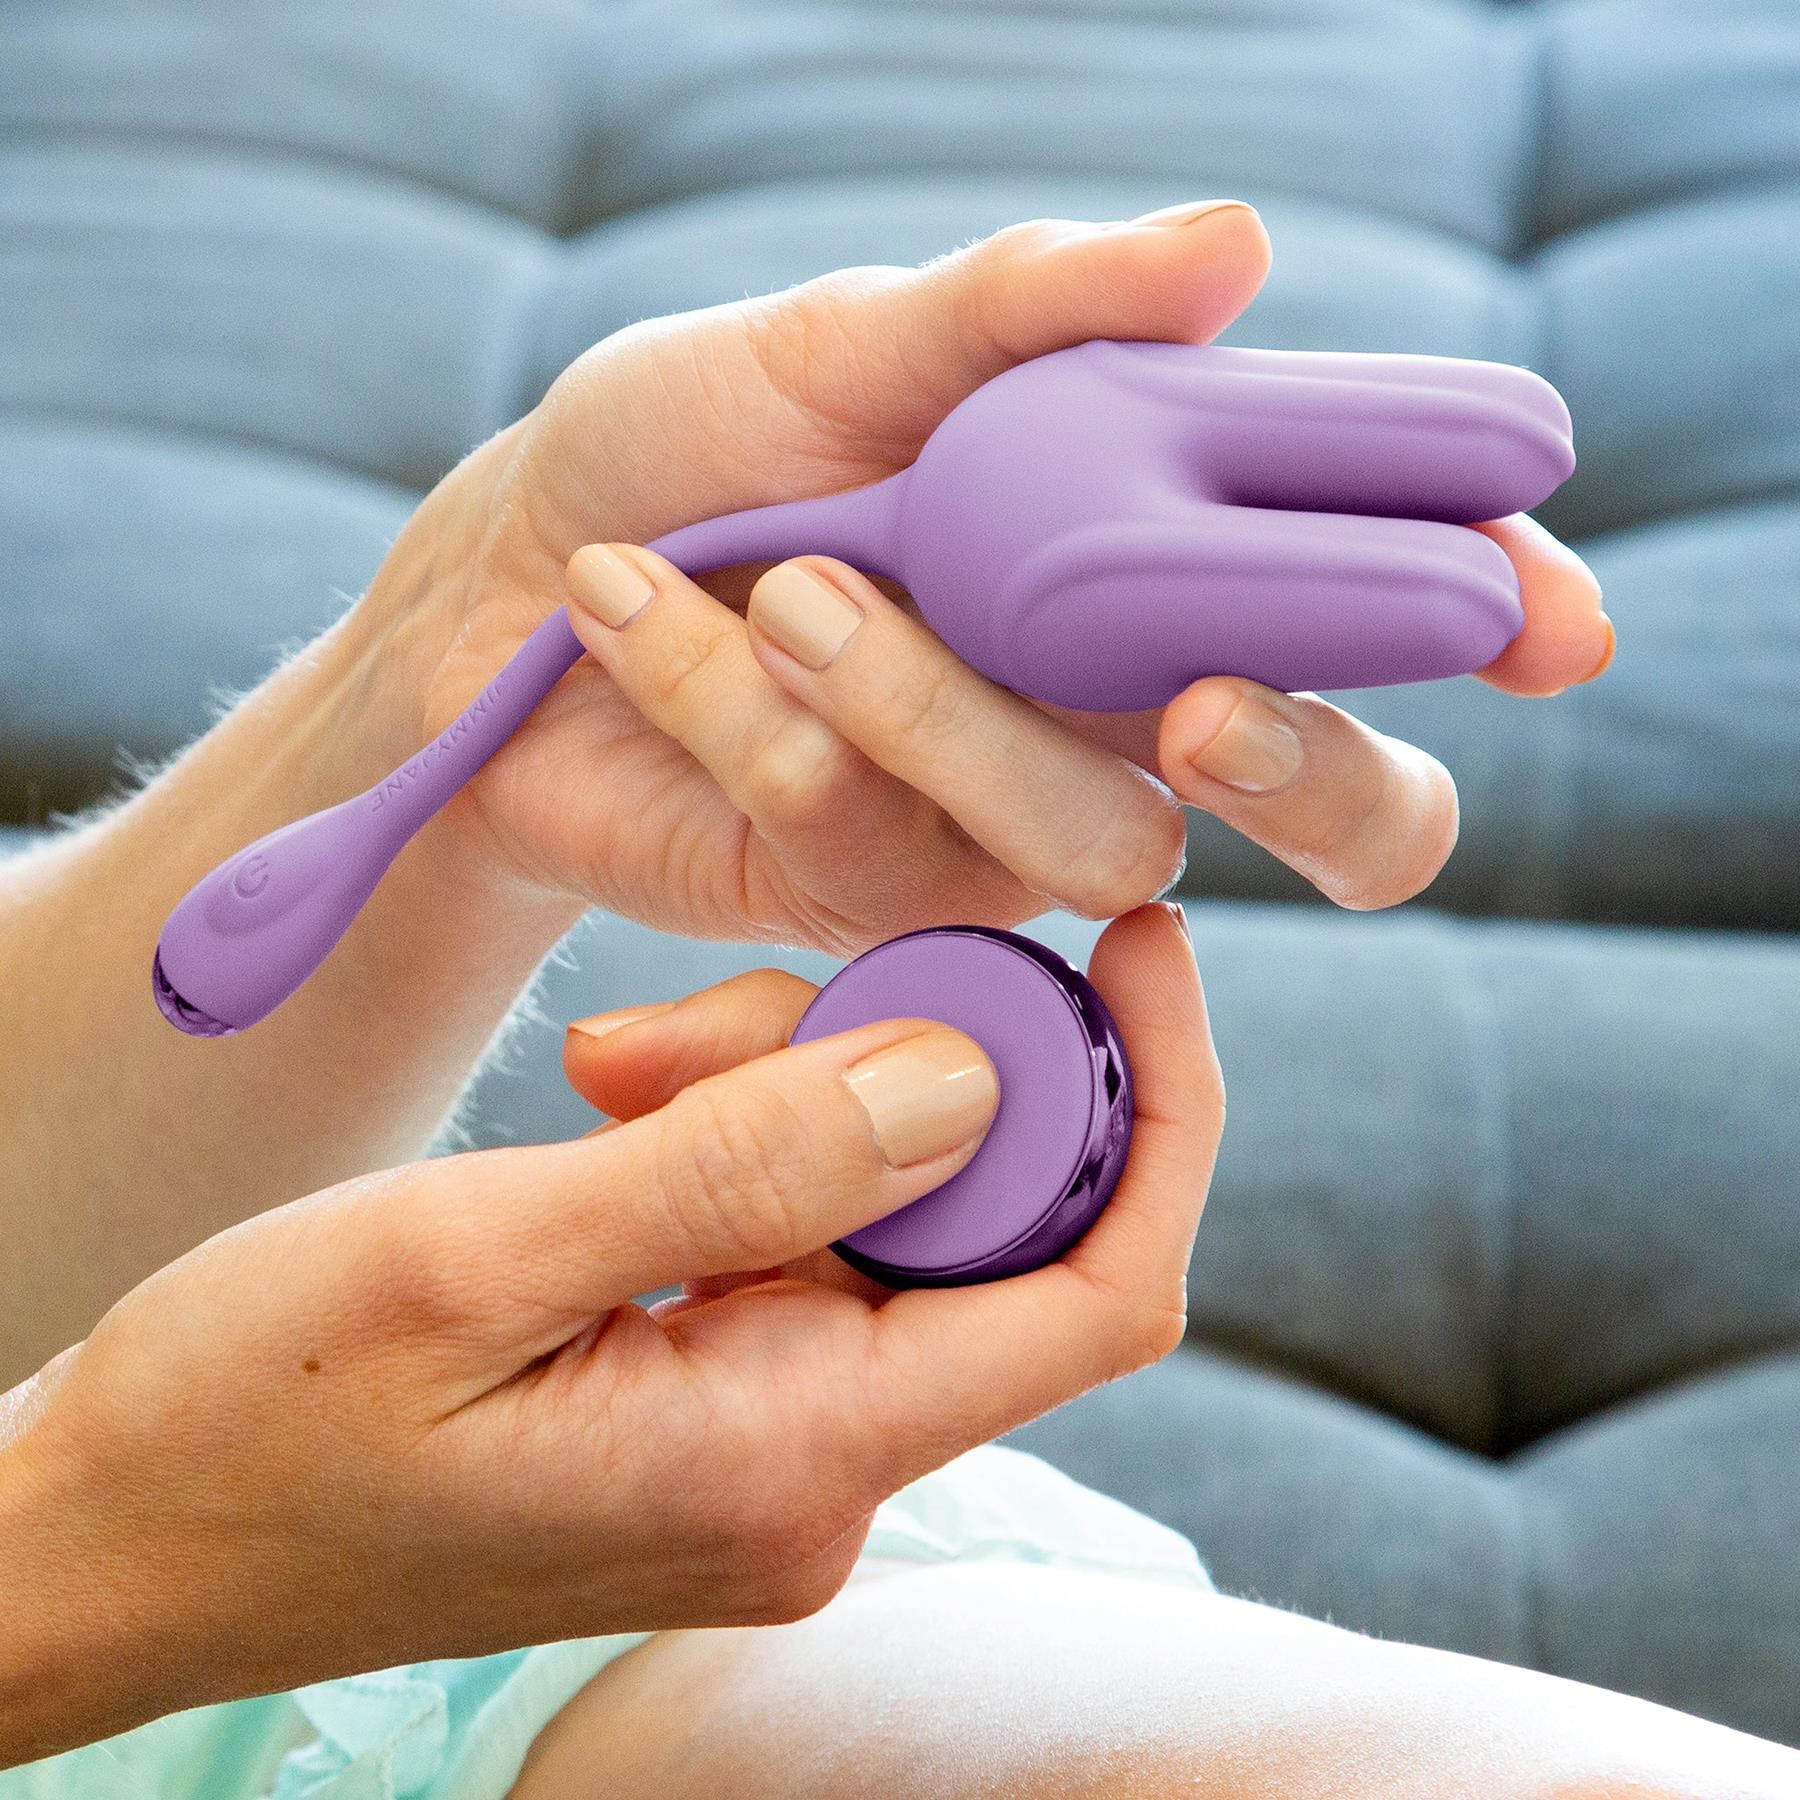 Jimmy Jane Form 2 Kegel Trainer With Remote Control - Hand Shot